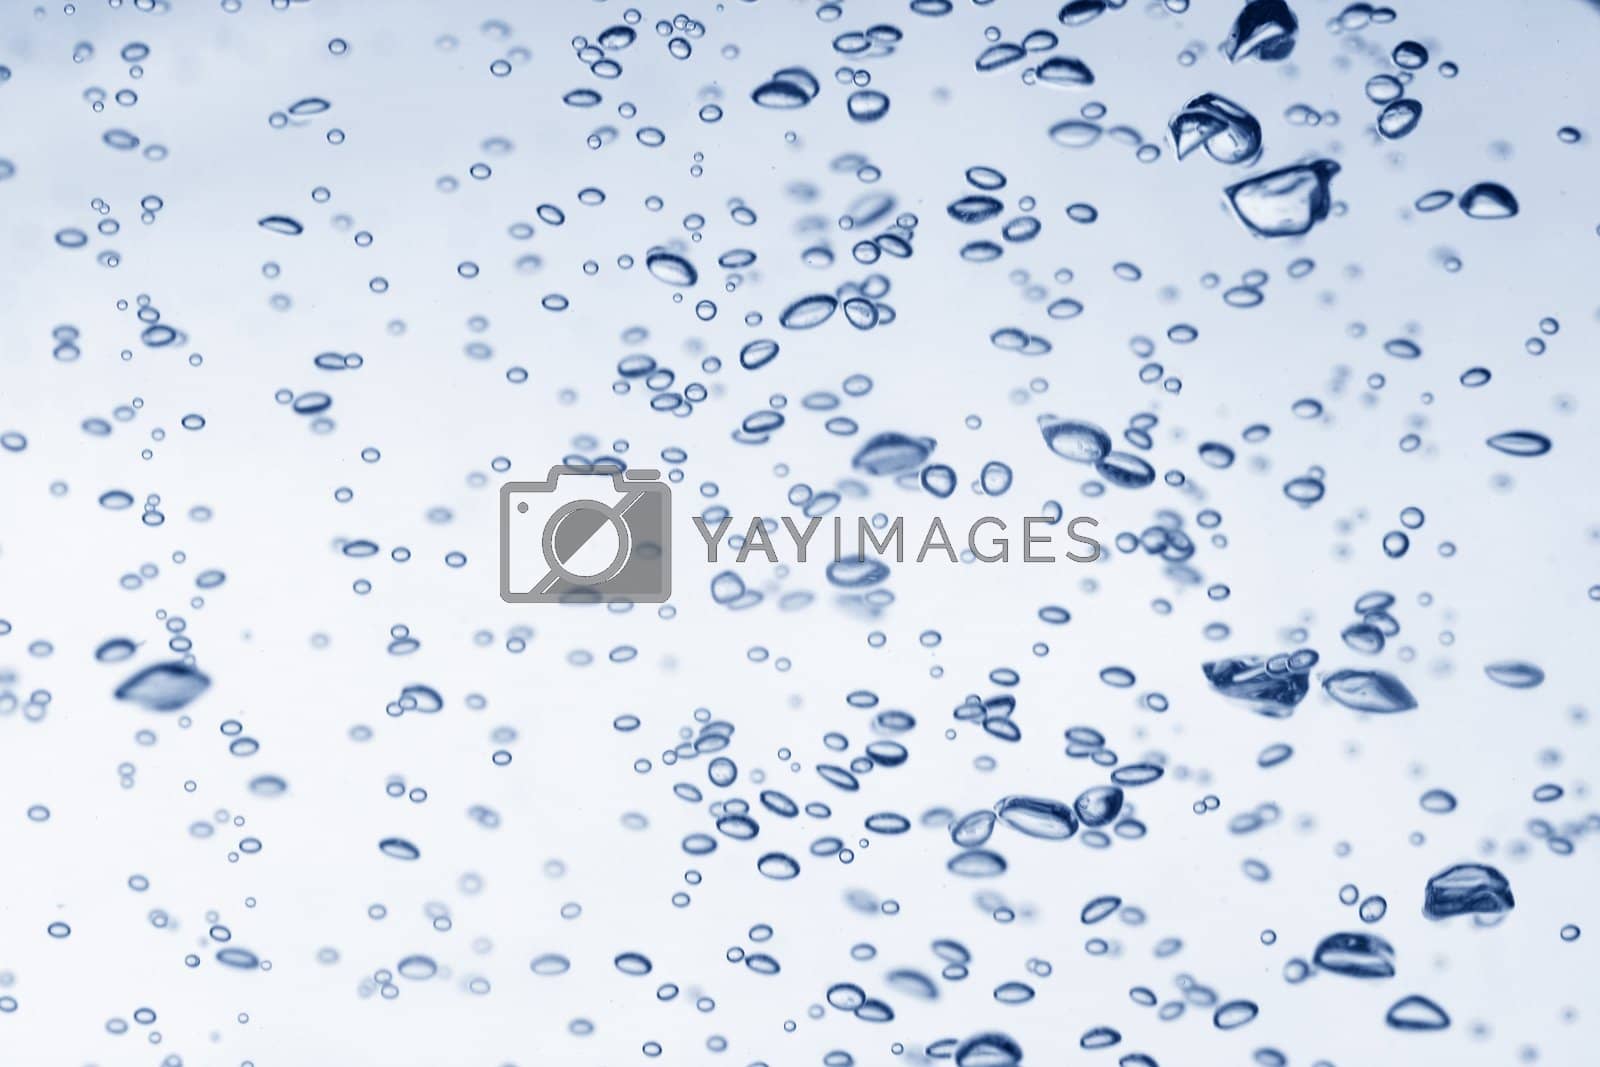 Royalty free image of bubble background by Yellowj